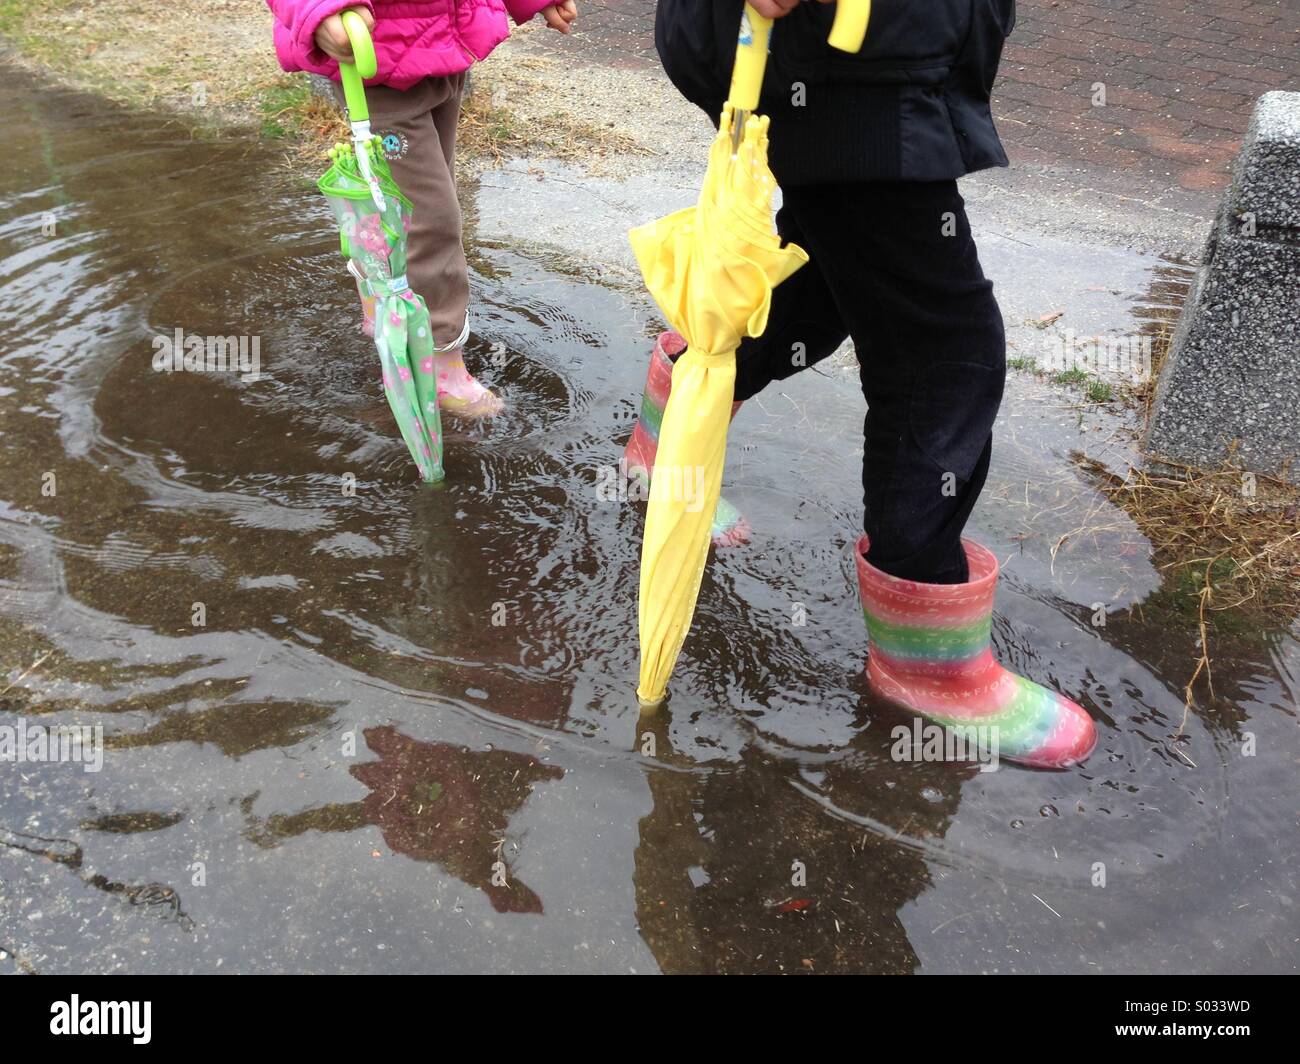 Two children wearing wellingtons and holding umbrellas walk through a puddle. Stock Photo